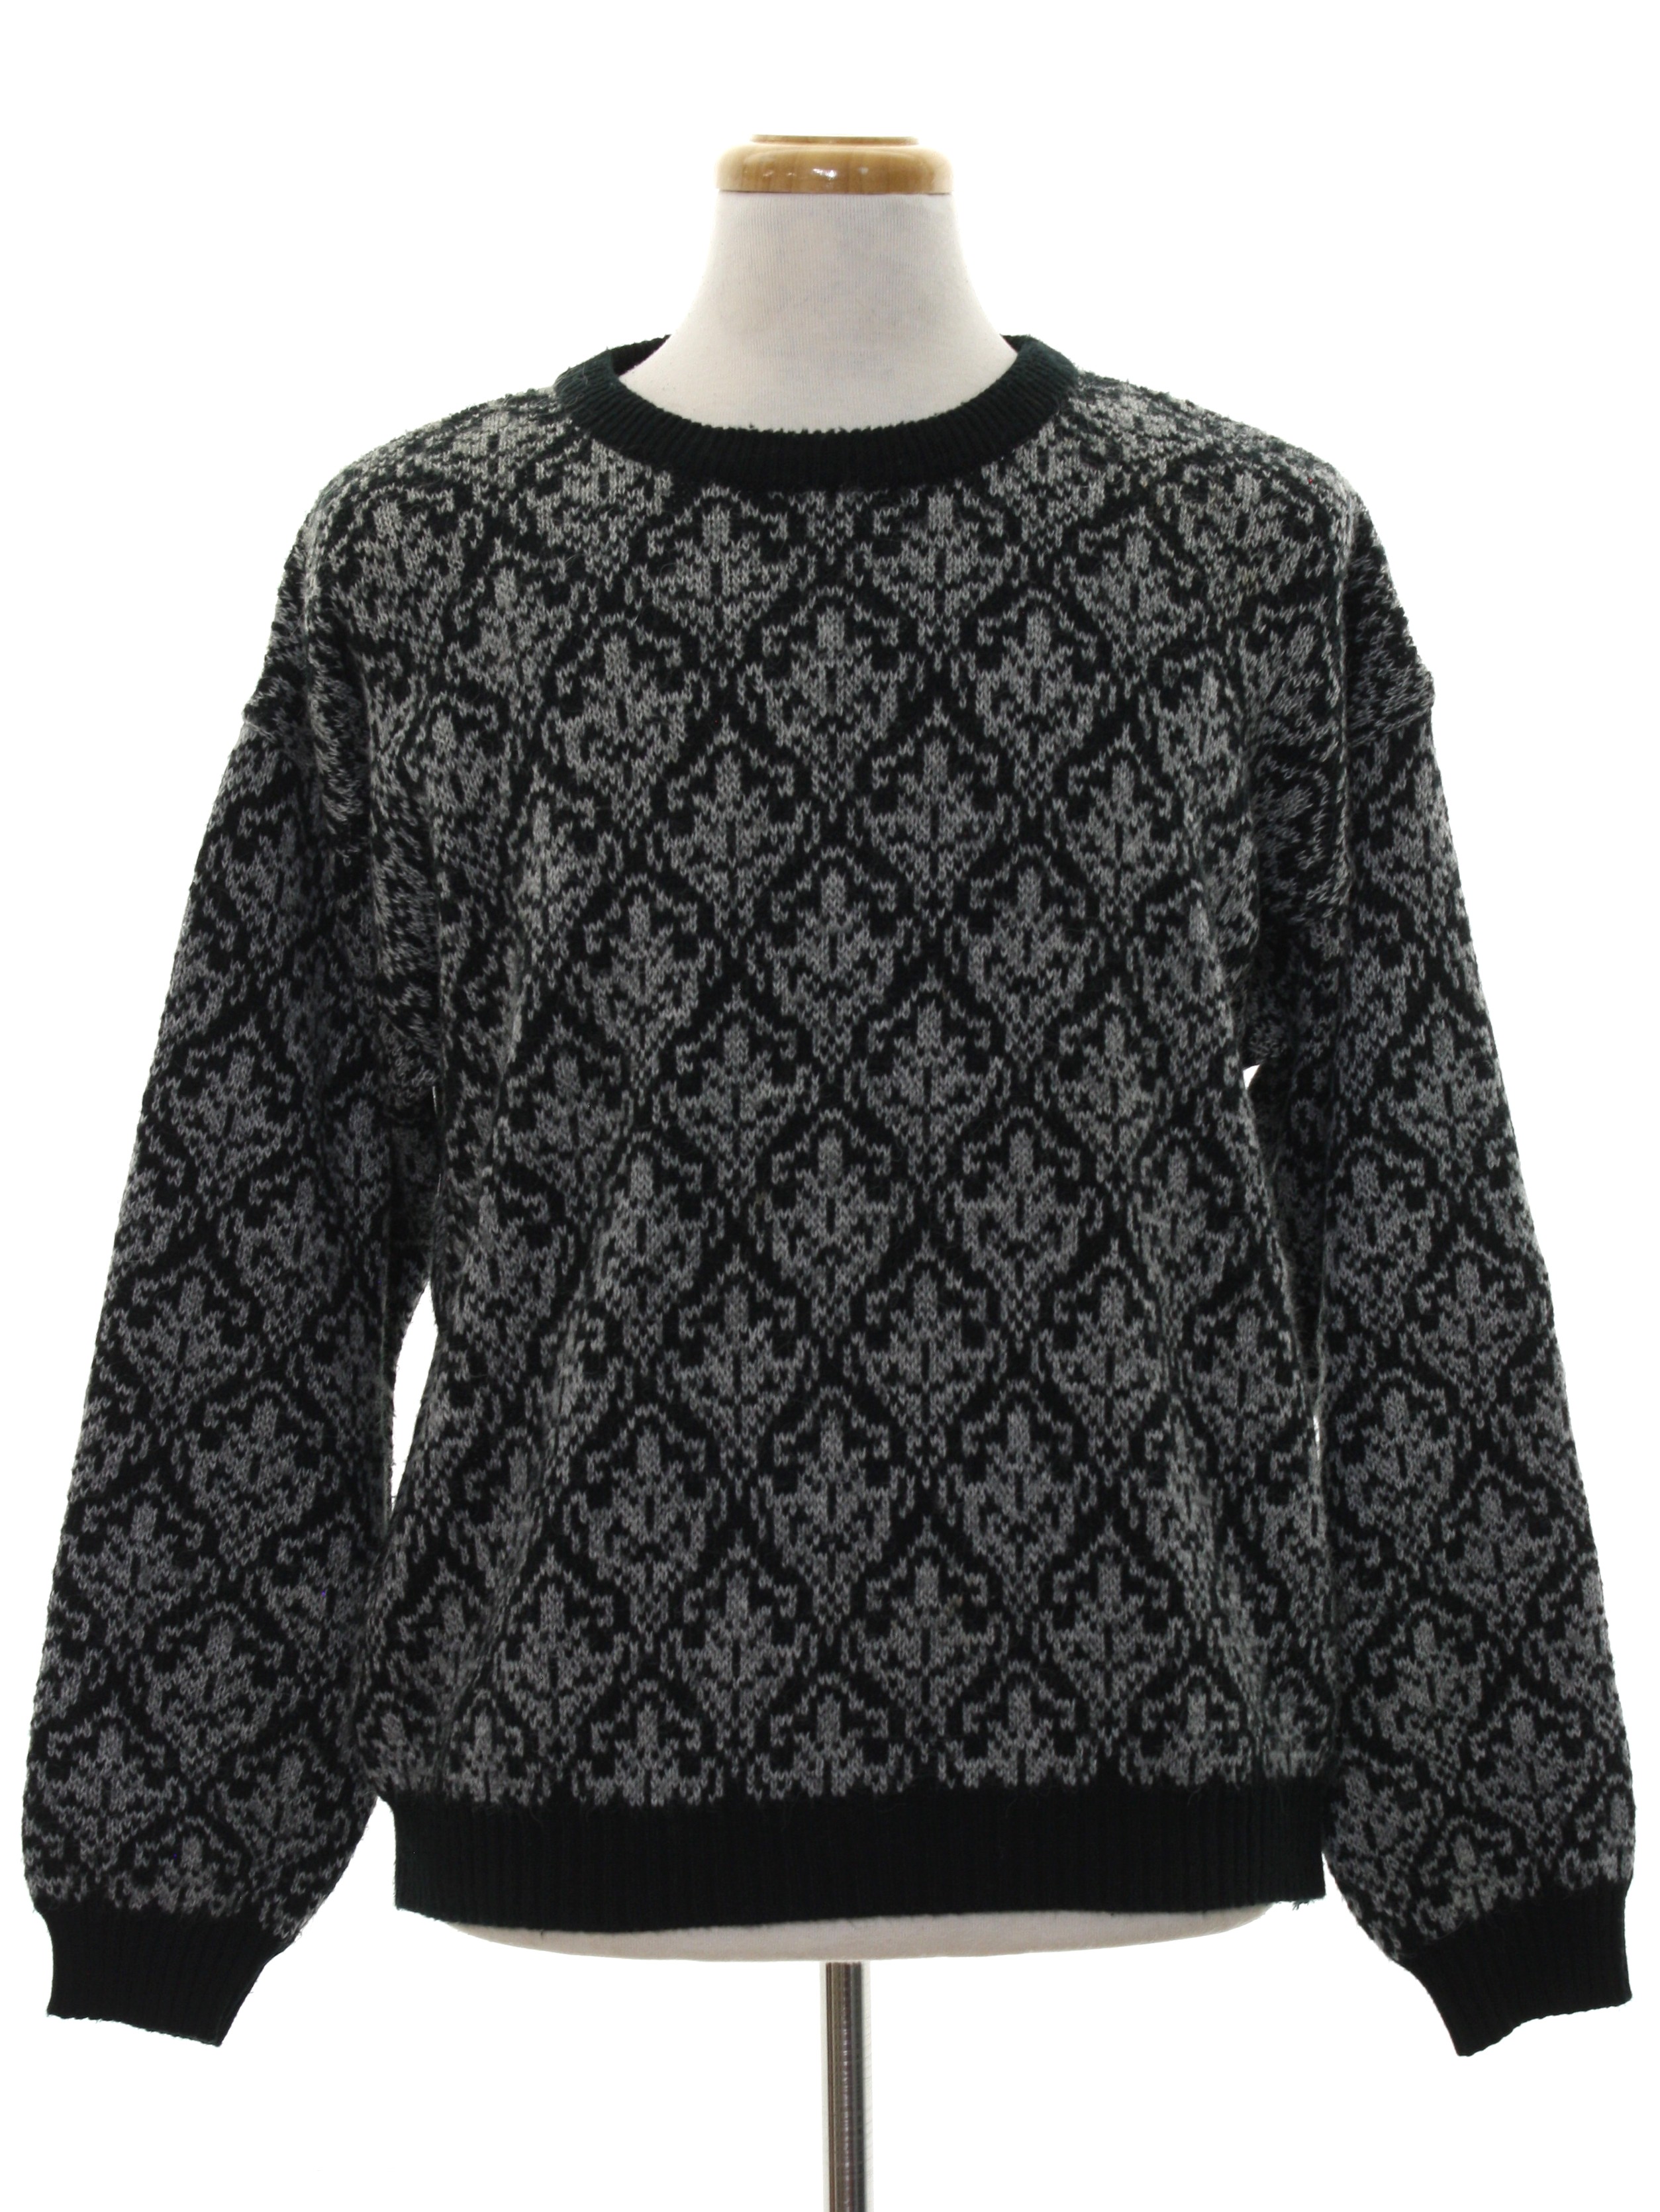 80's Vintage Sweater: 80s -Jed- Mens black and heathered grey floral ...